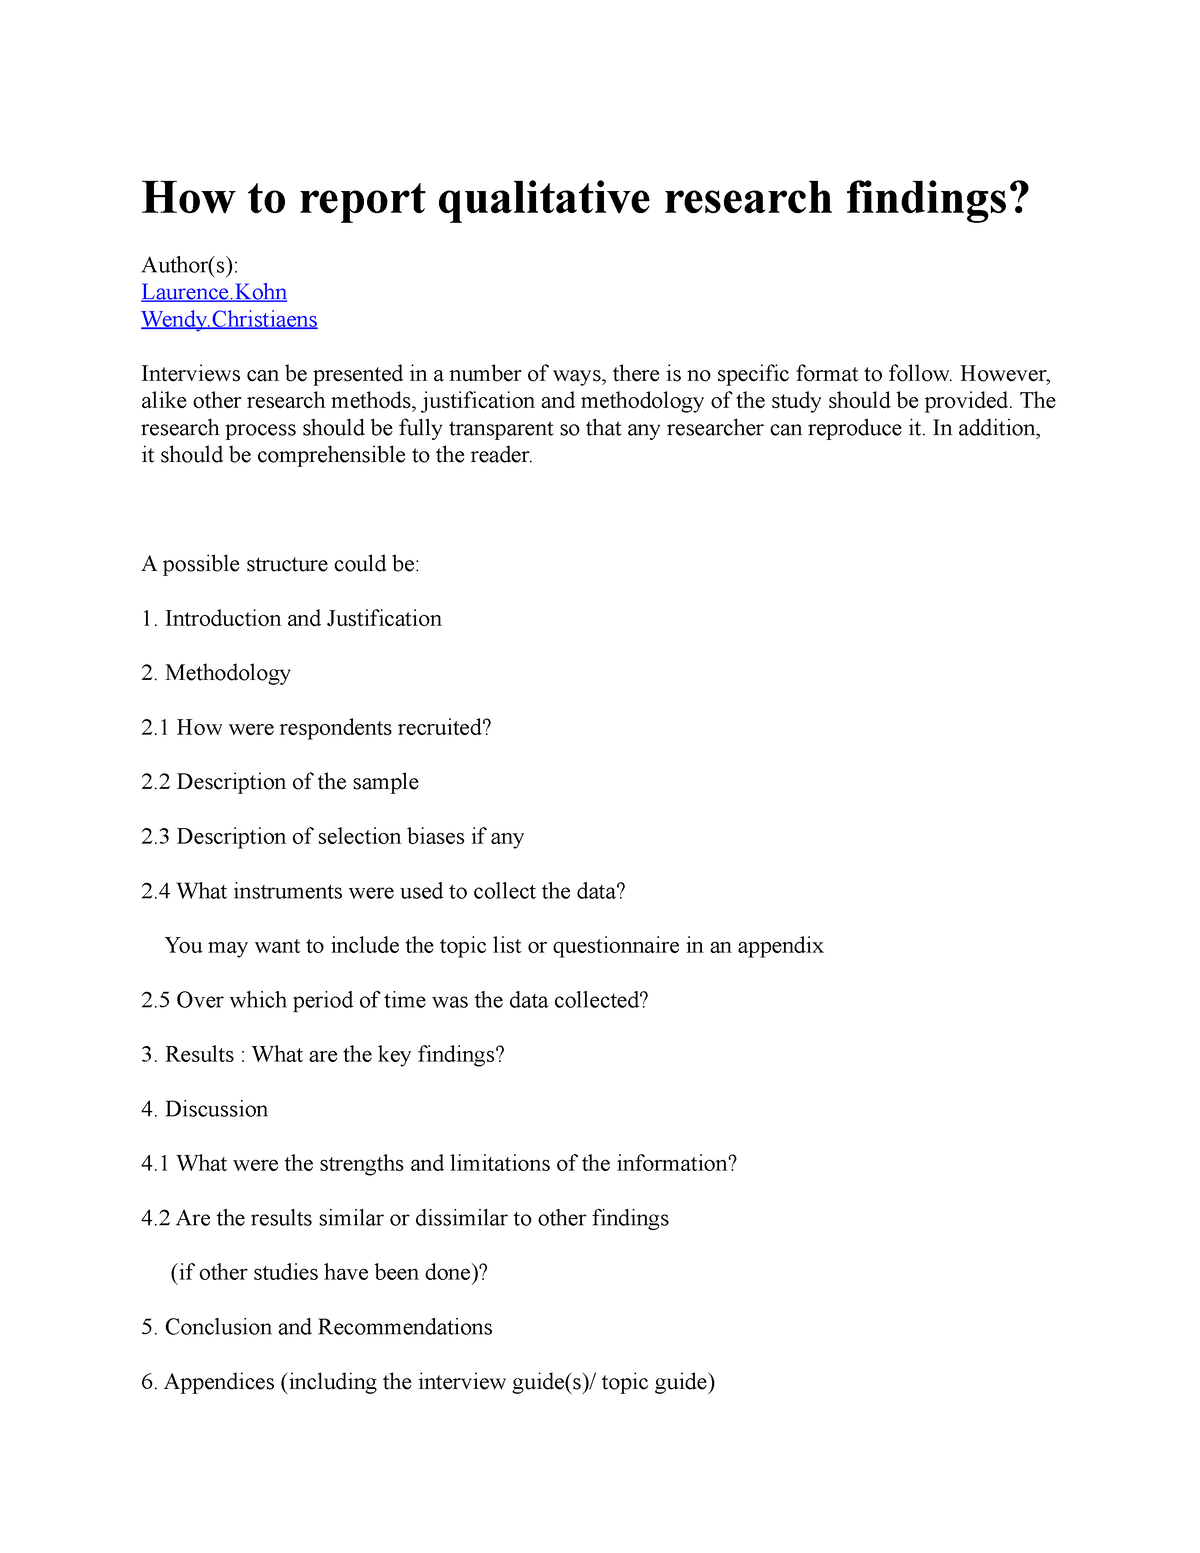 writing findings for qualitative research